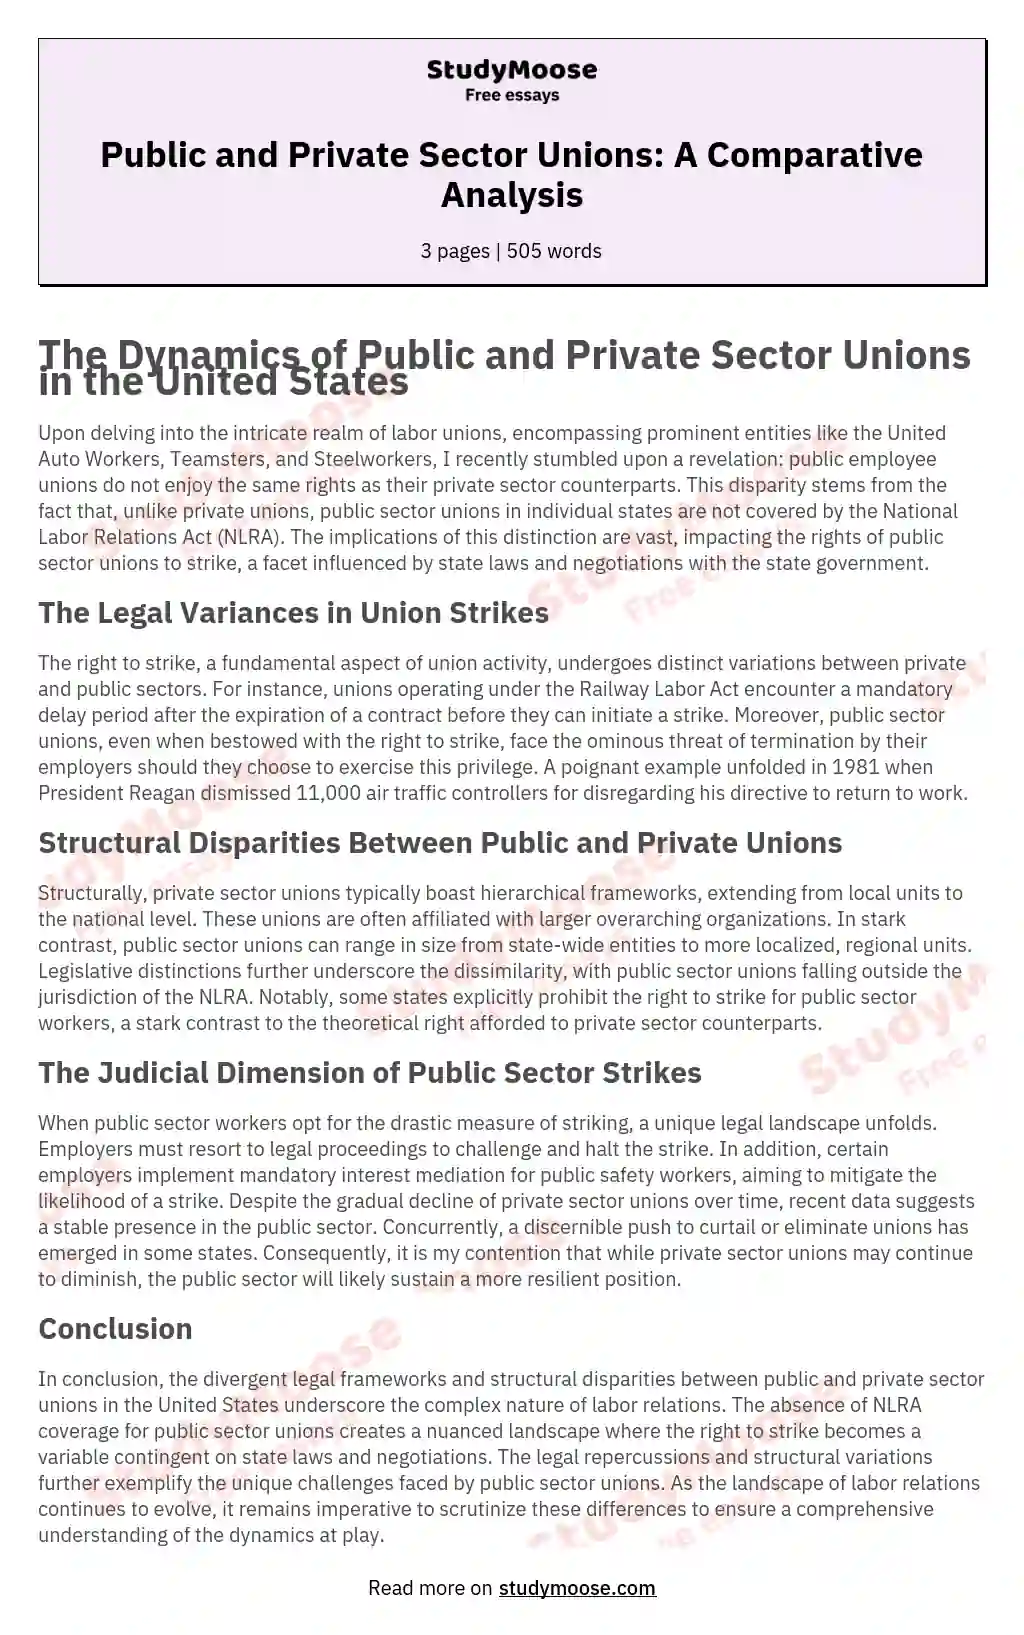 What Are the Differences and Similarities Between Public and Private Sector Unions?